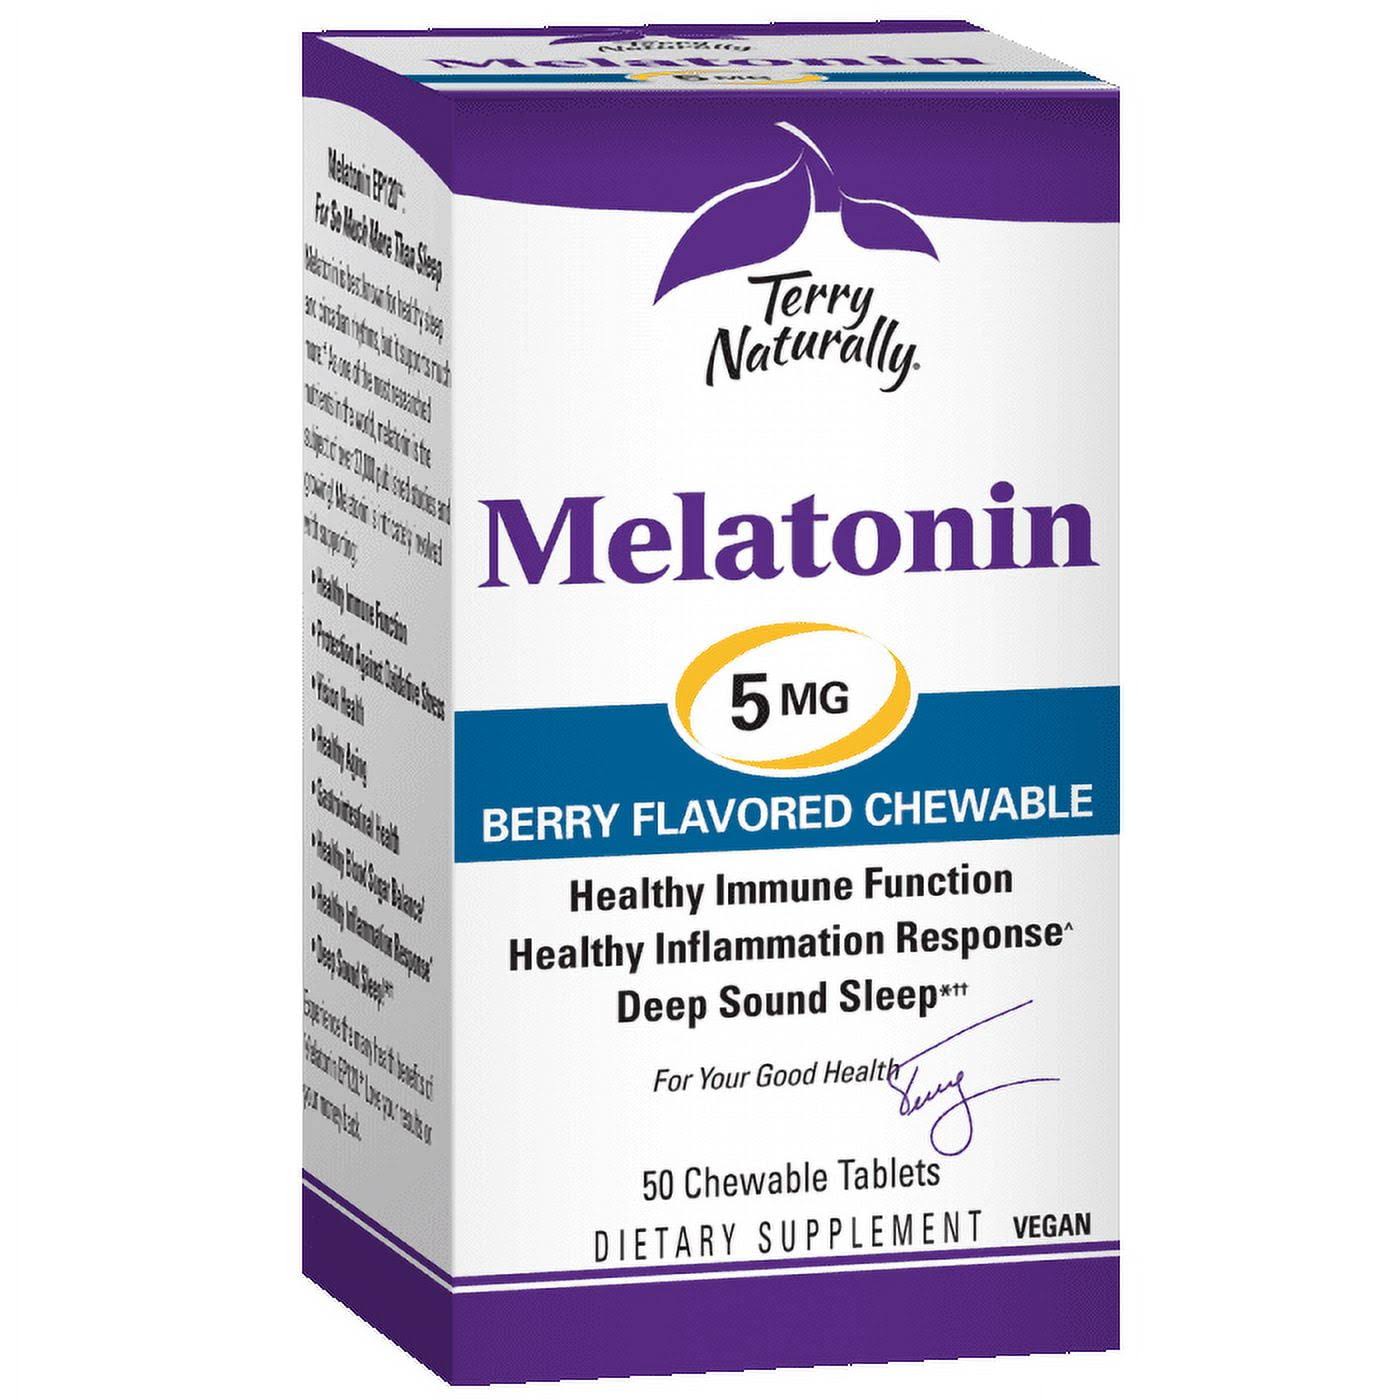 Terry Naturally Melatonin 5 mg, 50 Chewable Tablets